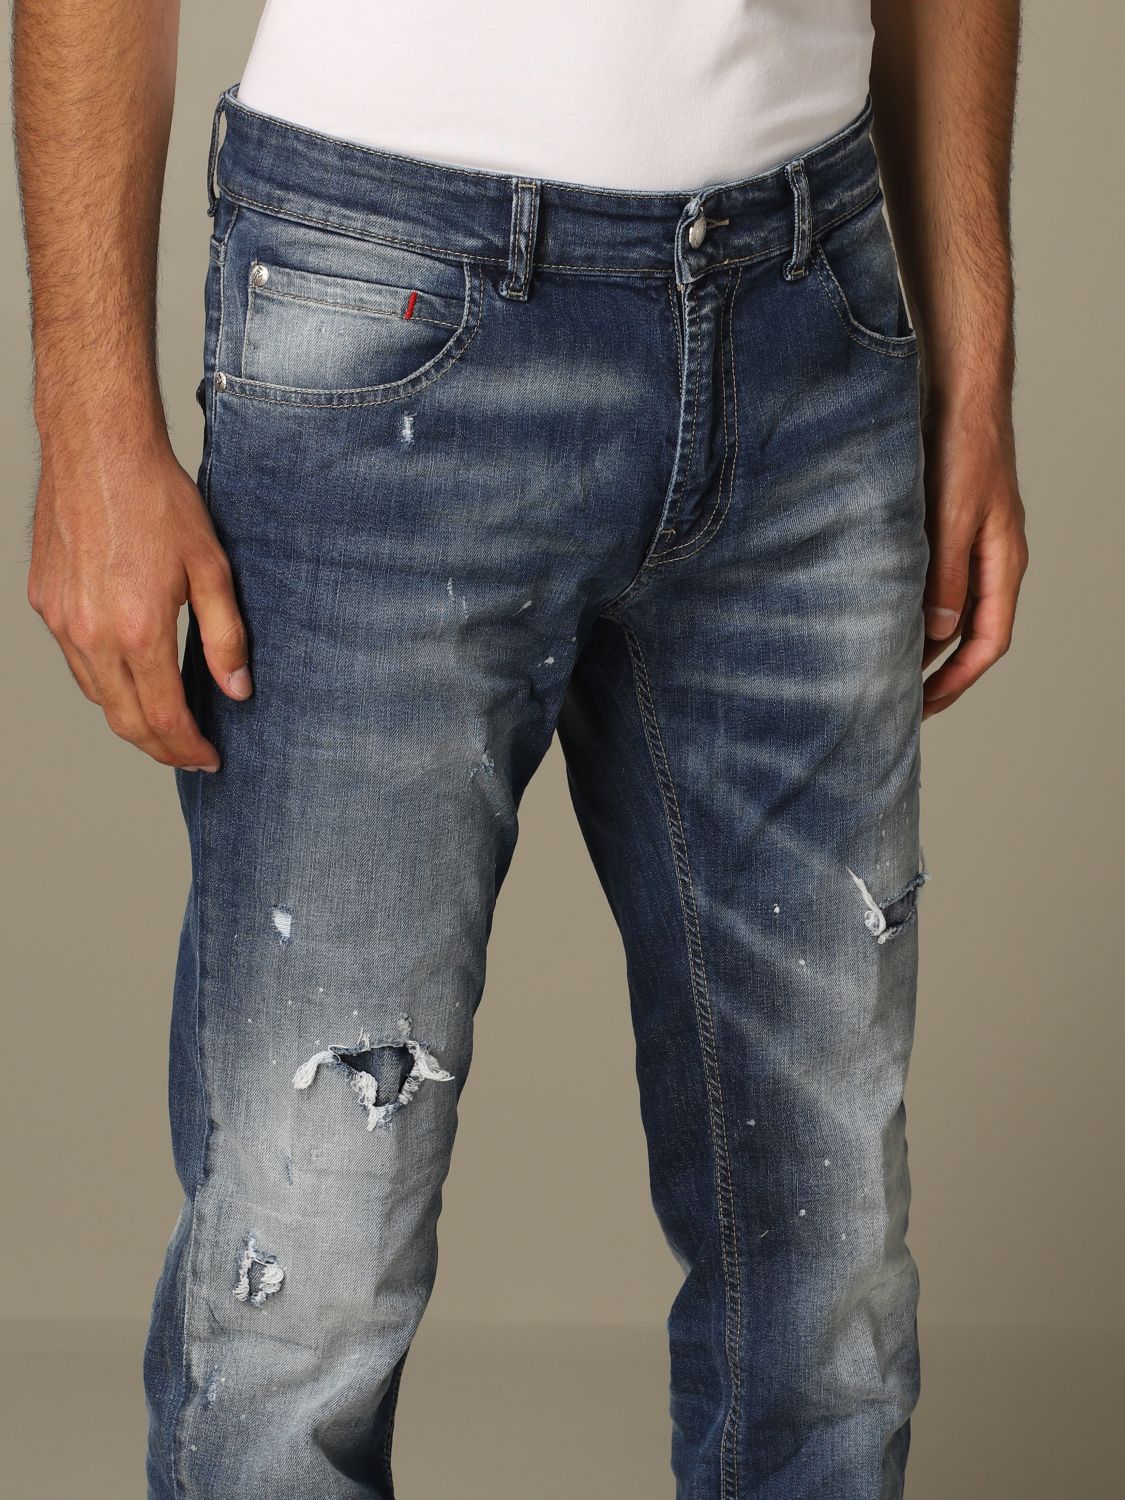 Frankie Morello Outlet: Regular jeans with tears - Stone Washed | Frankie Morello jeans FMS0004JE 1002 online at GIGLIO.COM